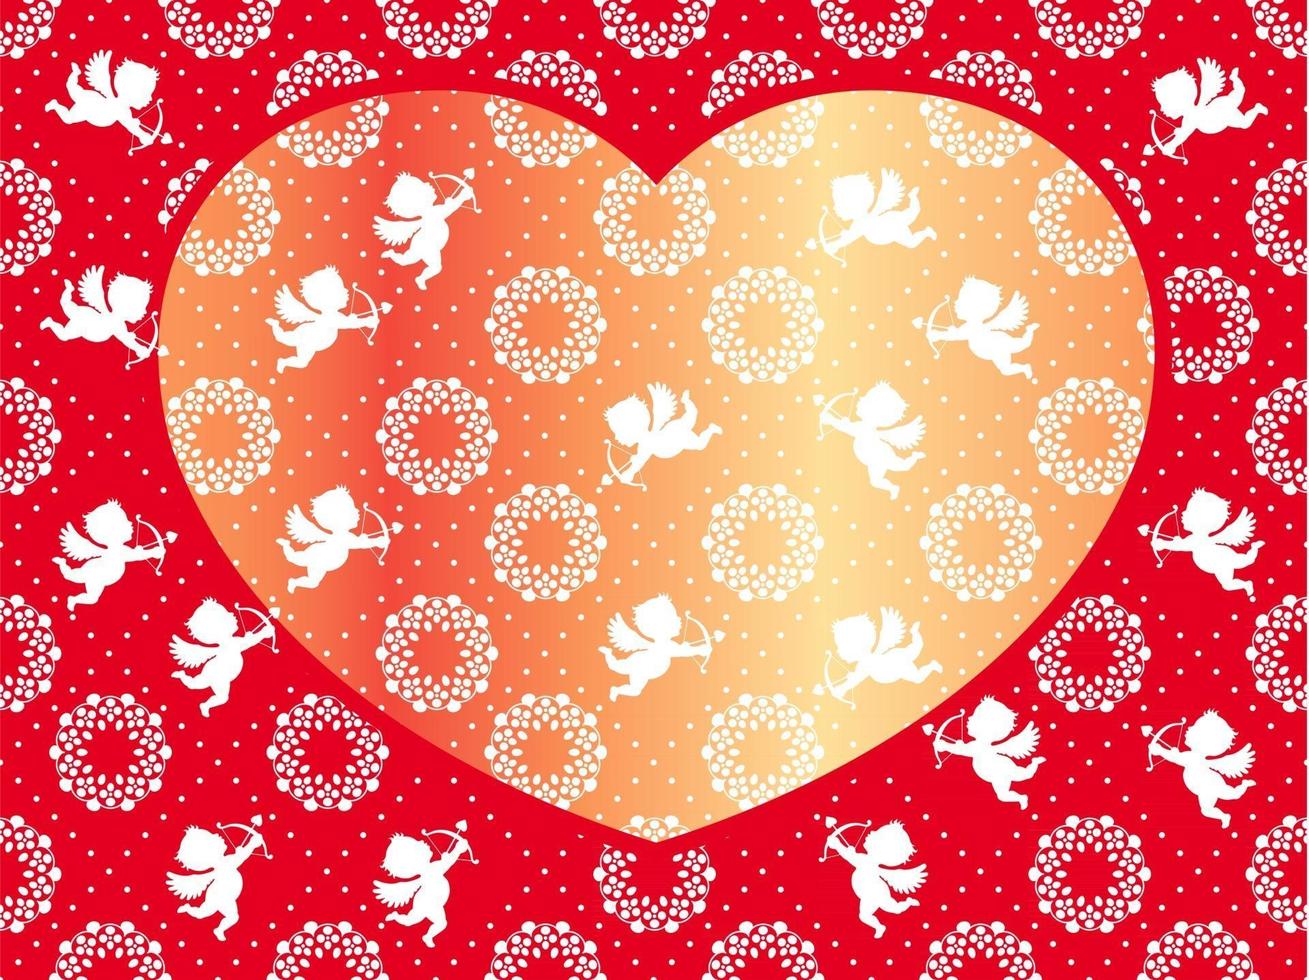 Valentines Day Seamless Vector Card Template With Cupids Flying In And Around A Heart Shape